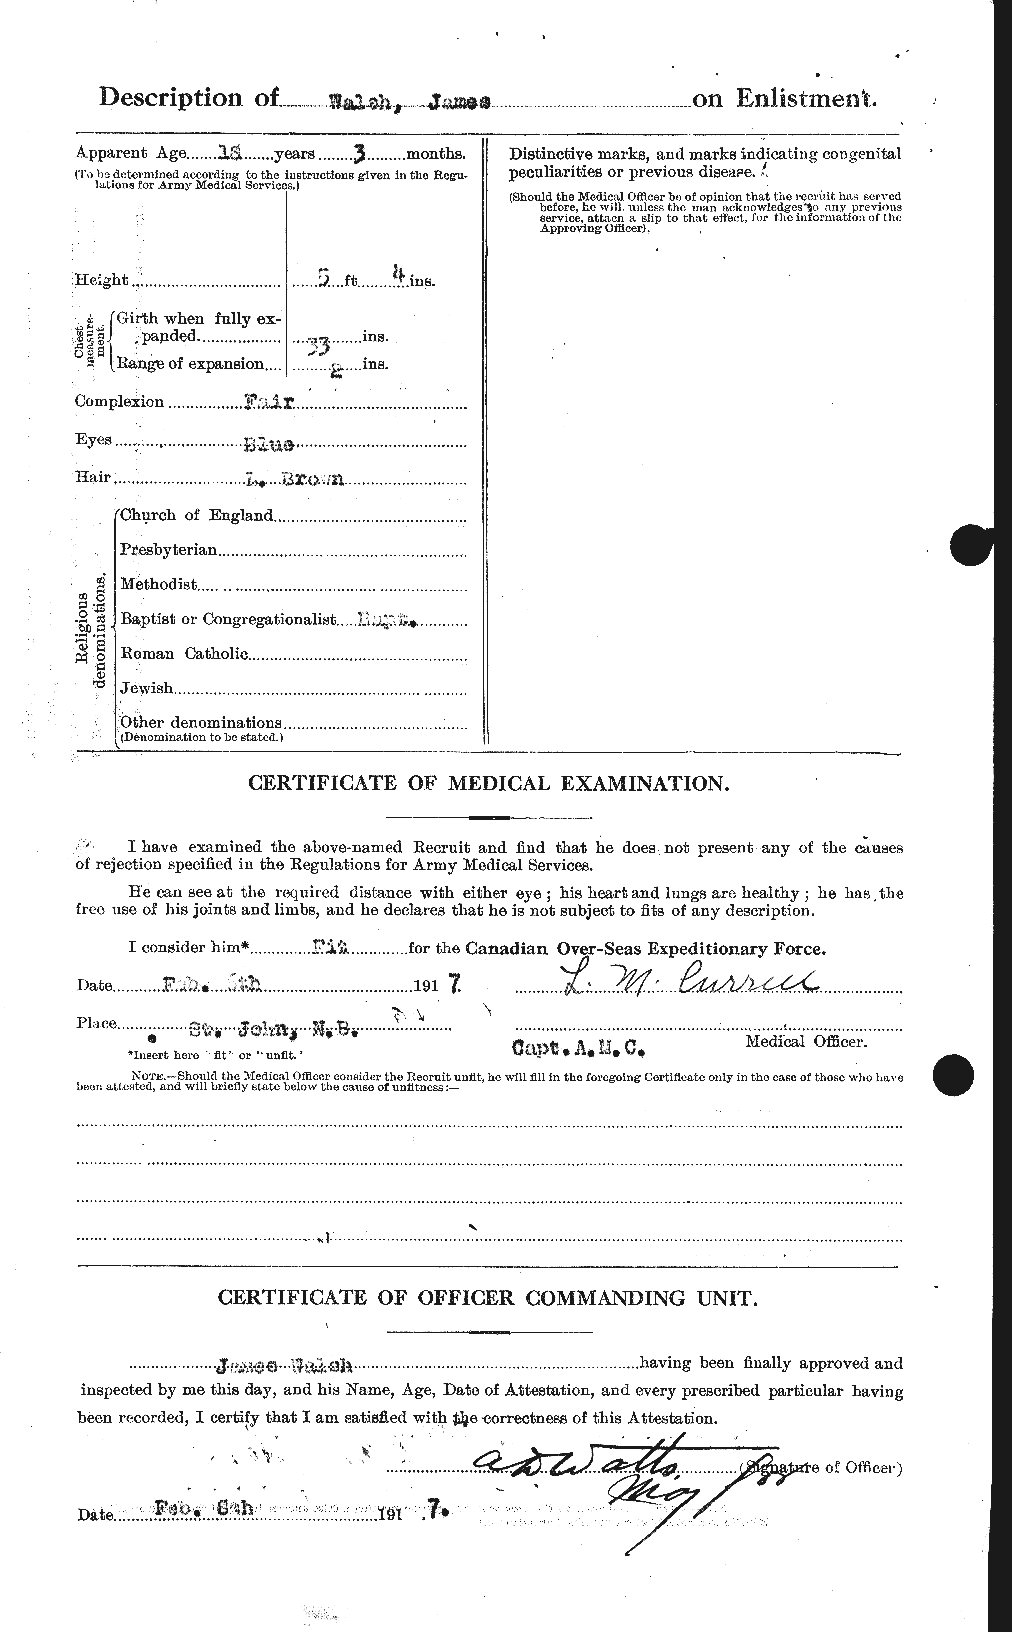 Personnel Records of the First World War - CEF 653281b